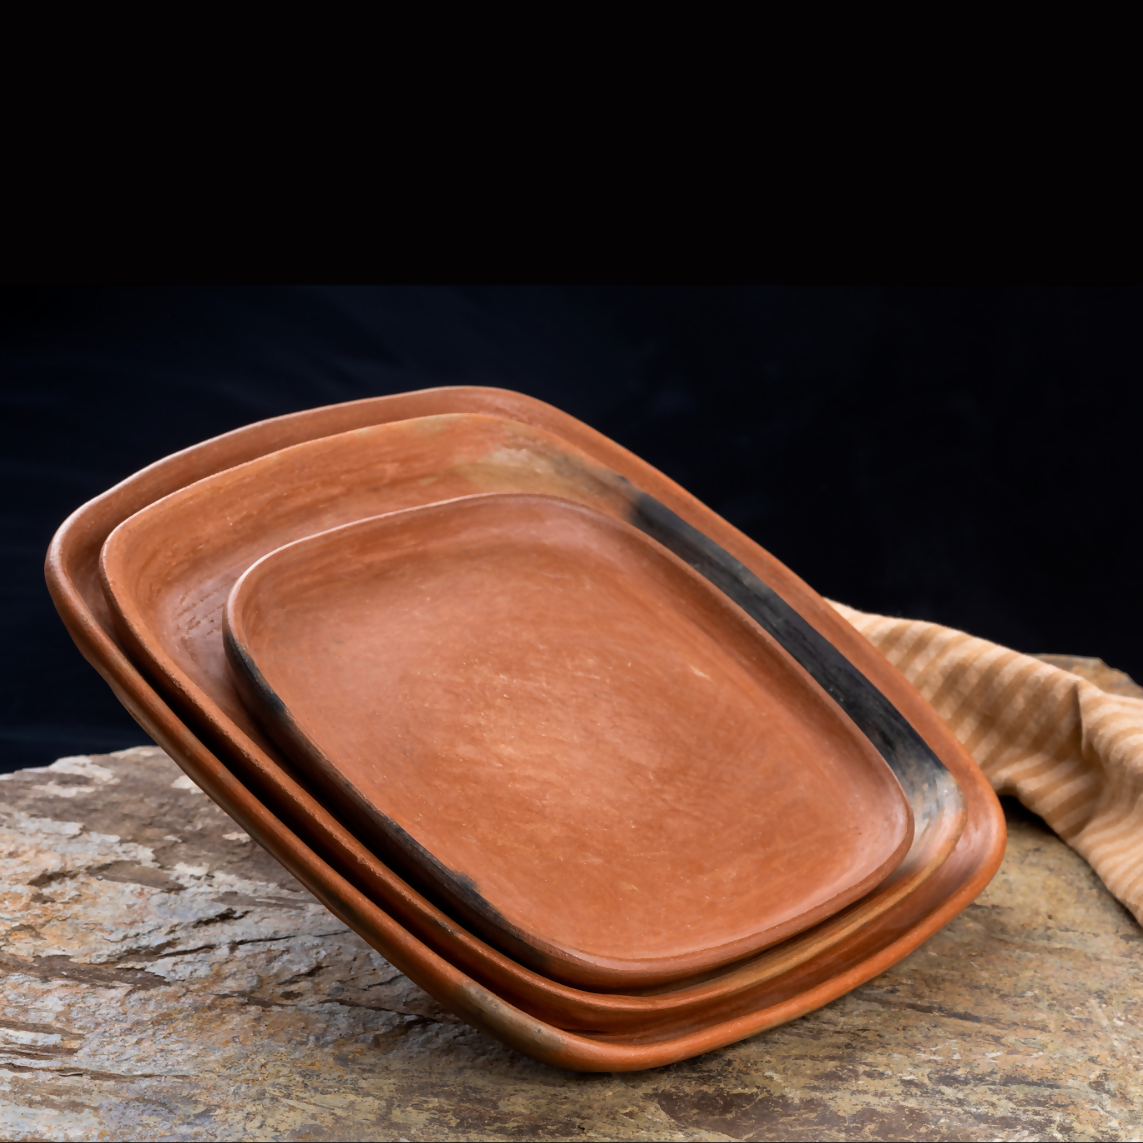 Rustic Clay Square Serving Tray From Tlahuitoltepec